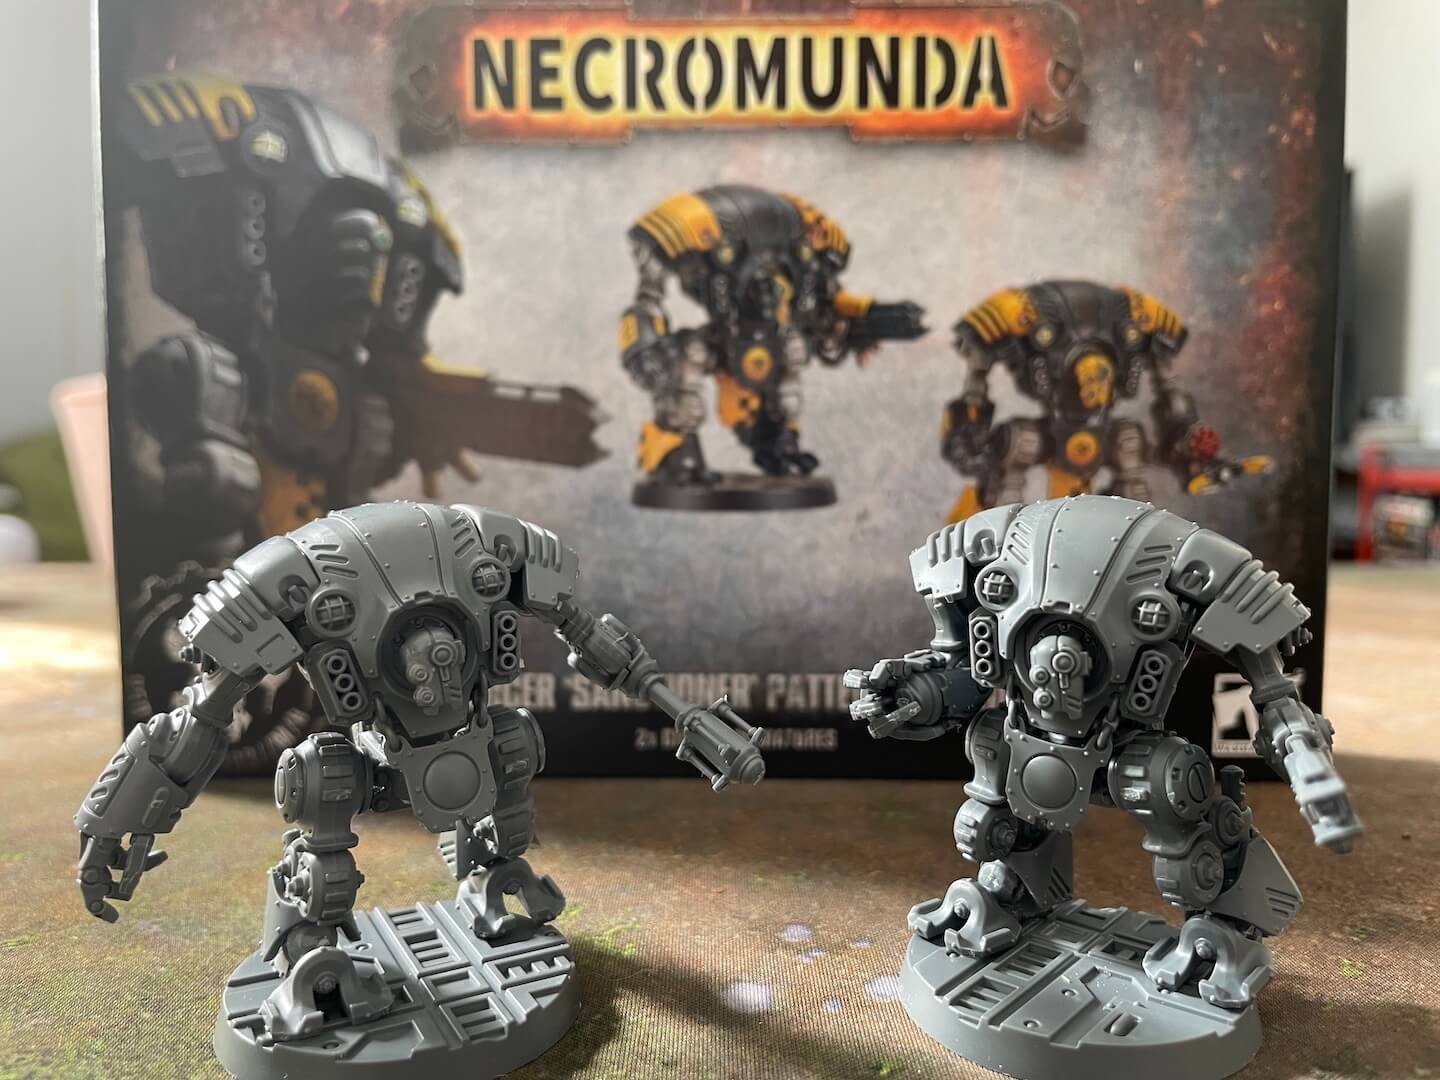 An image of Sanctioner Automata built but unpainted from Games Workshop's game Necromunda